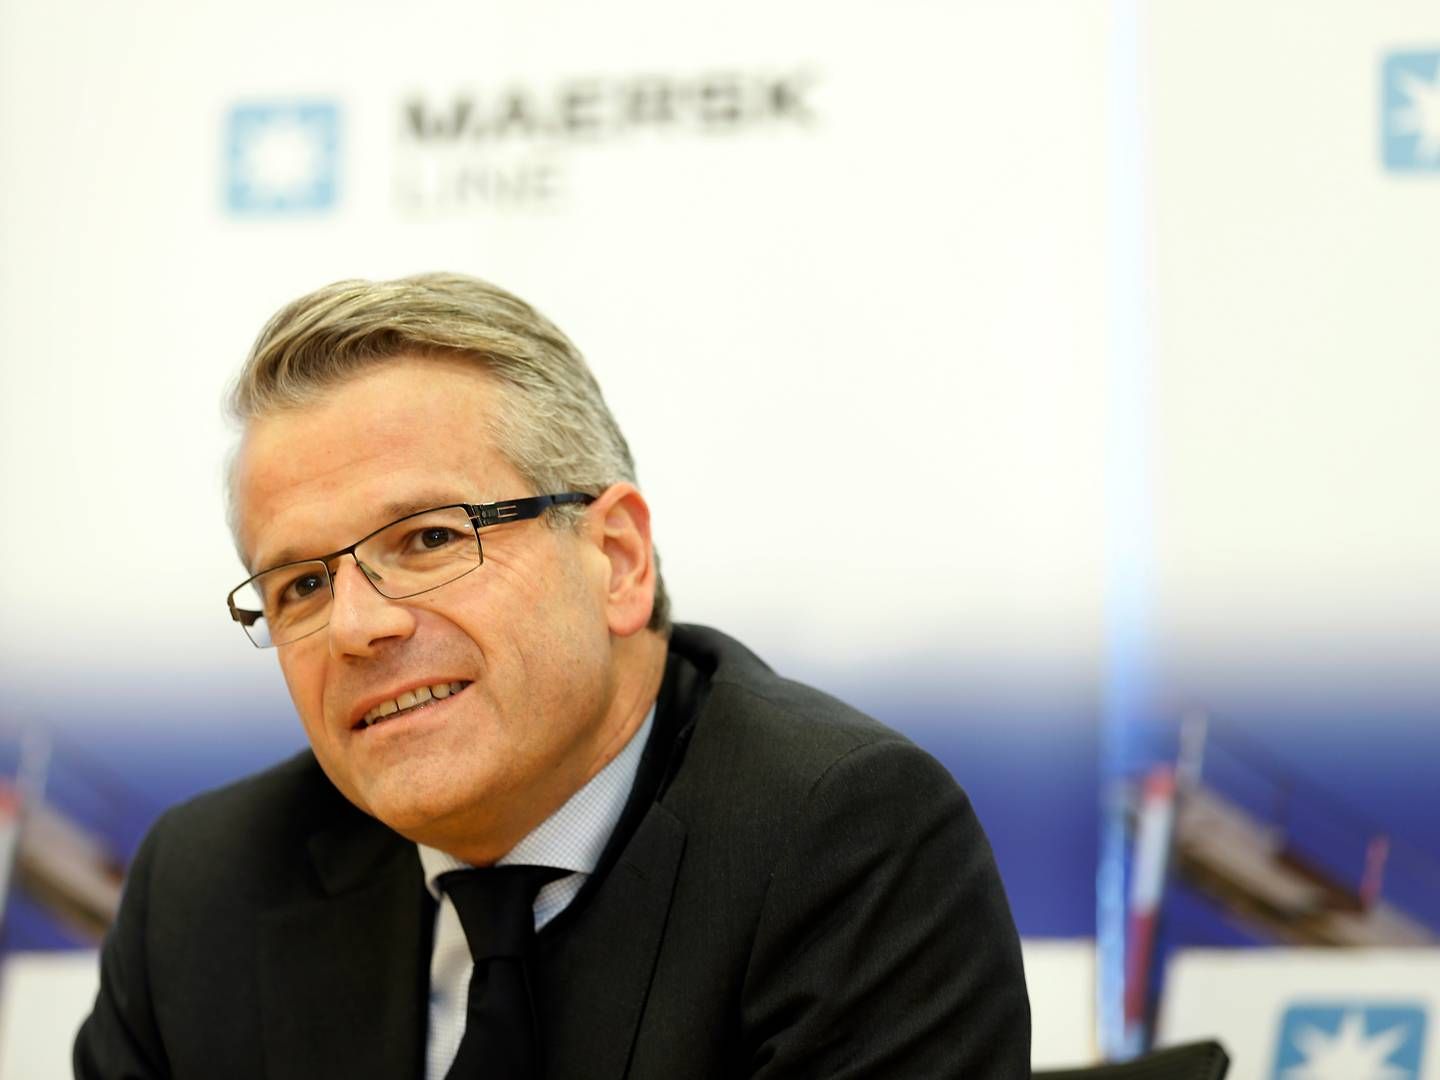 Vincent Clerc took over as Maersk CEO at the turn of the year, replacing Søren Skou who retired after spearheading the company for a little more than six years. | Photo: Yen Meng Jiin/AP/Ritzau Scanpix